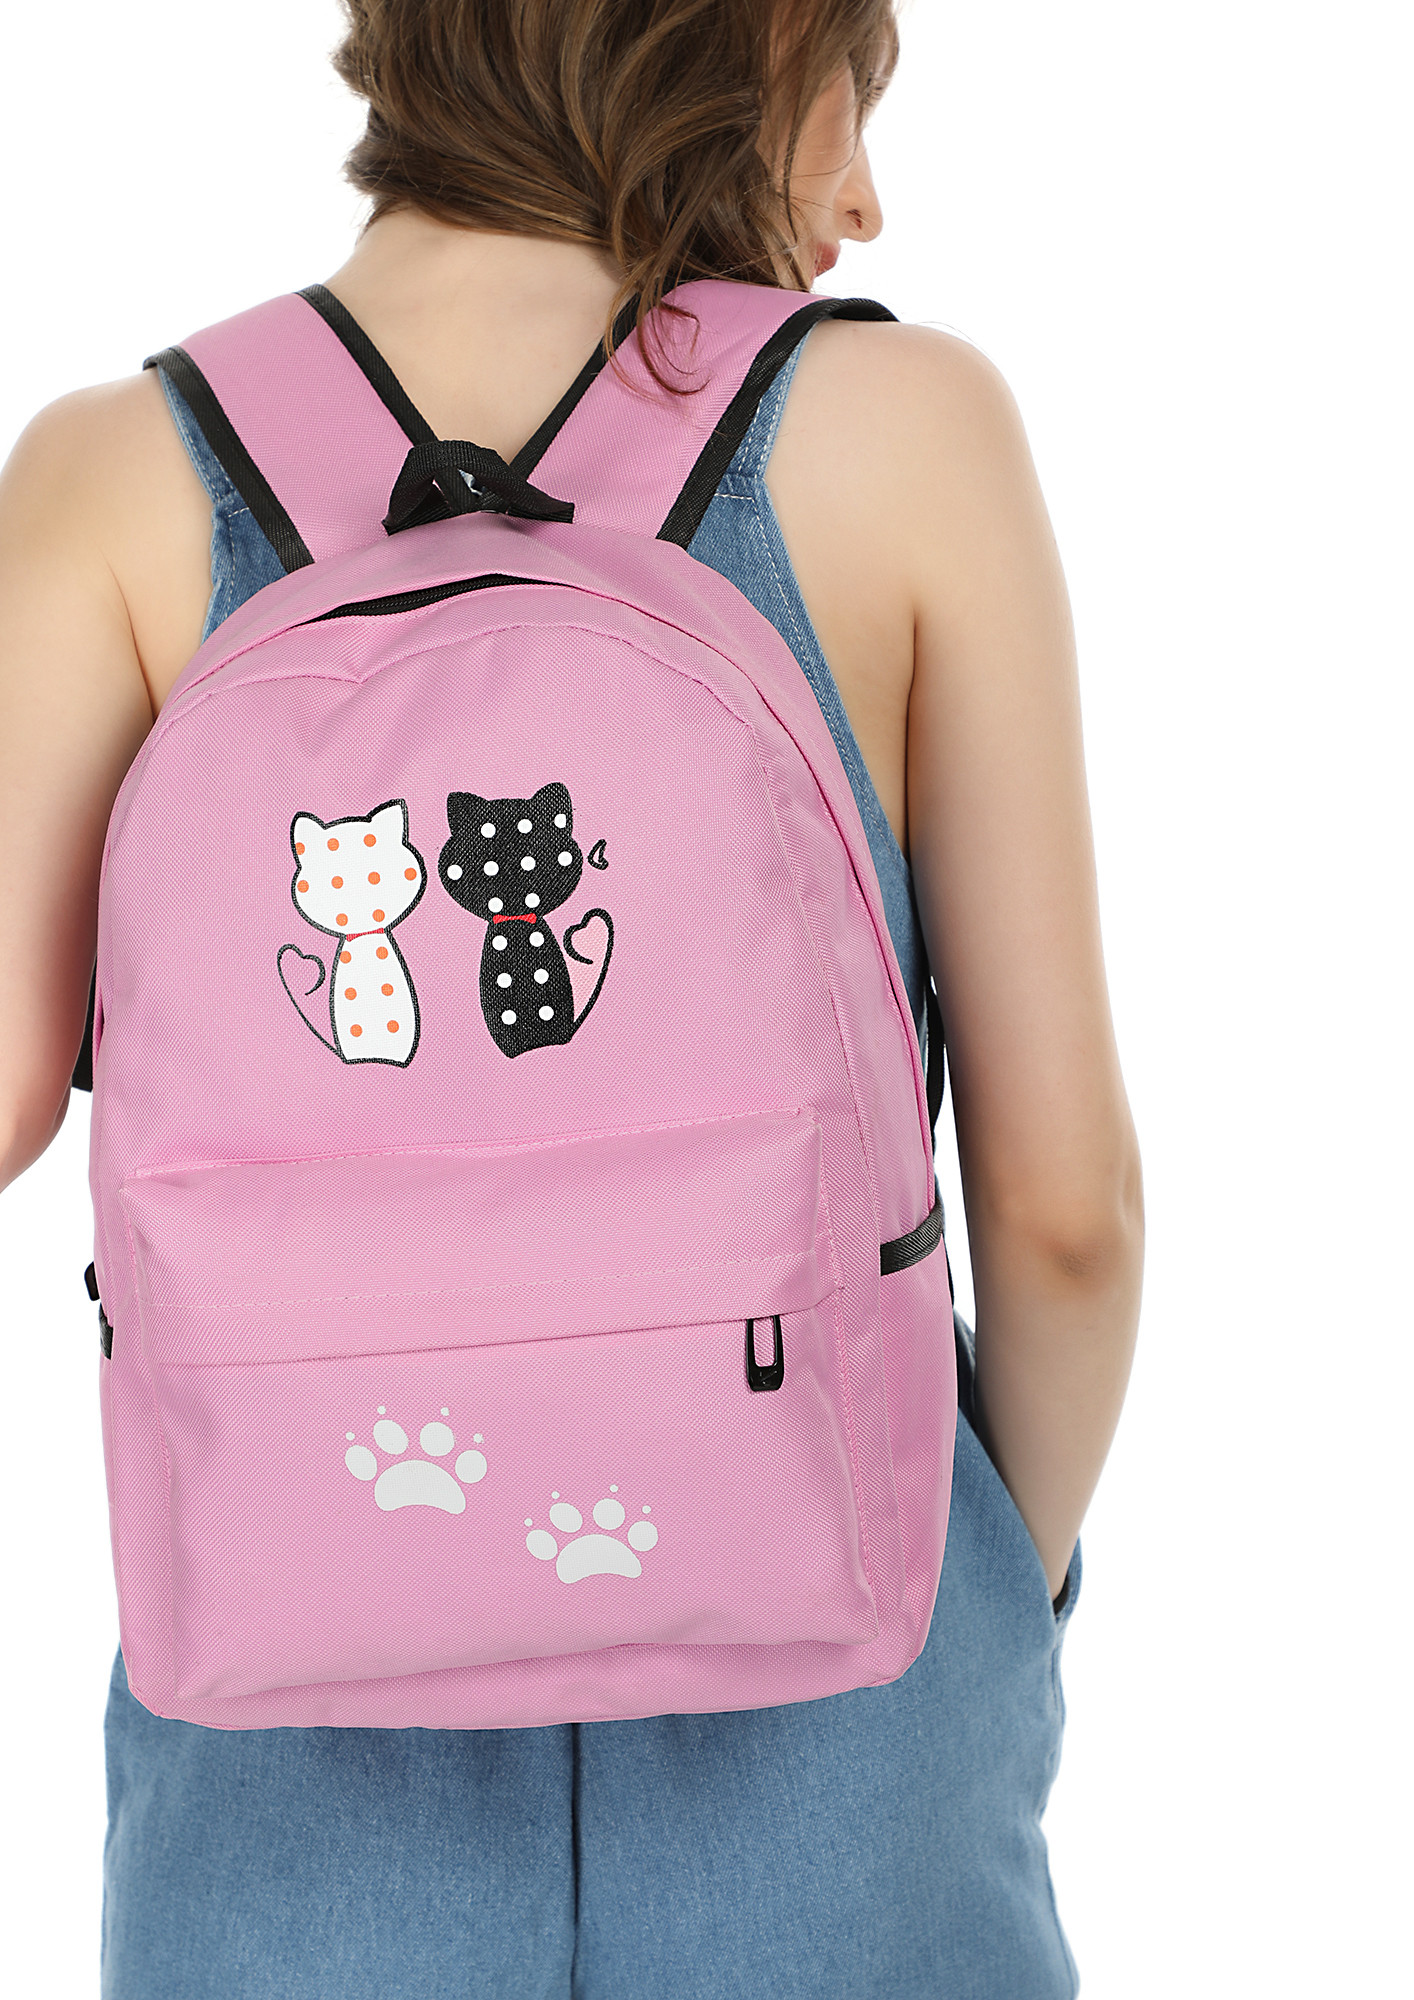 CUTENESS OVERLOADED PINK BACKPACK